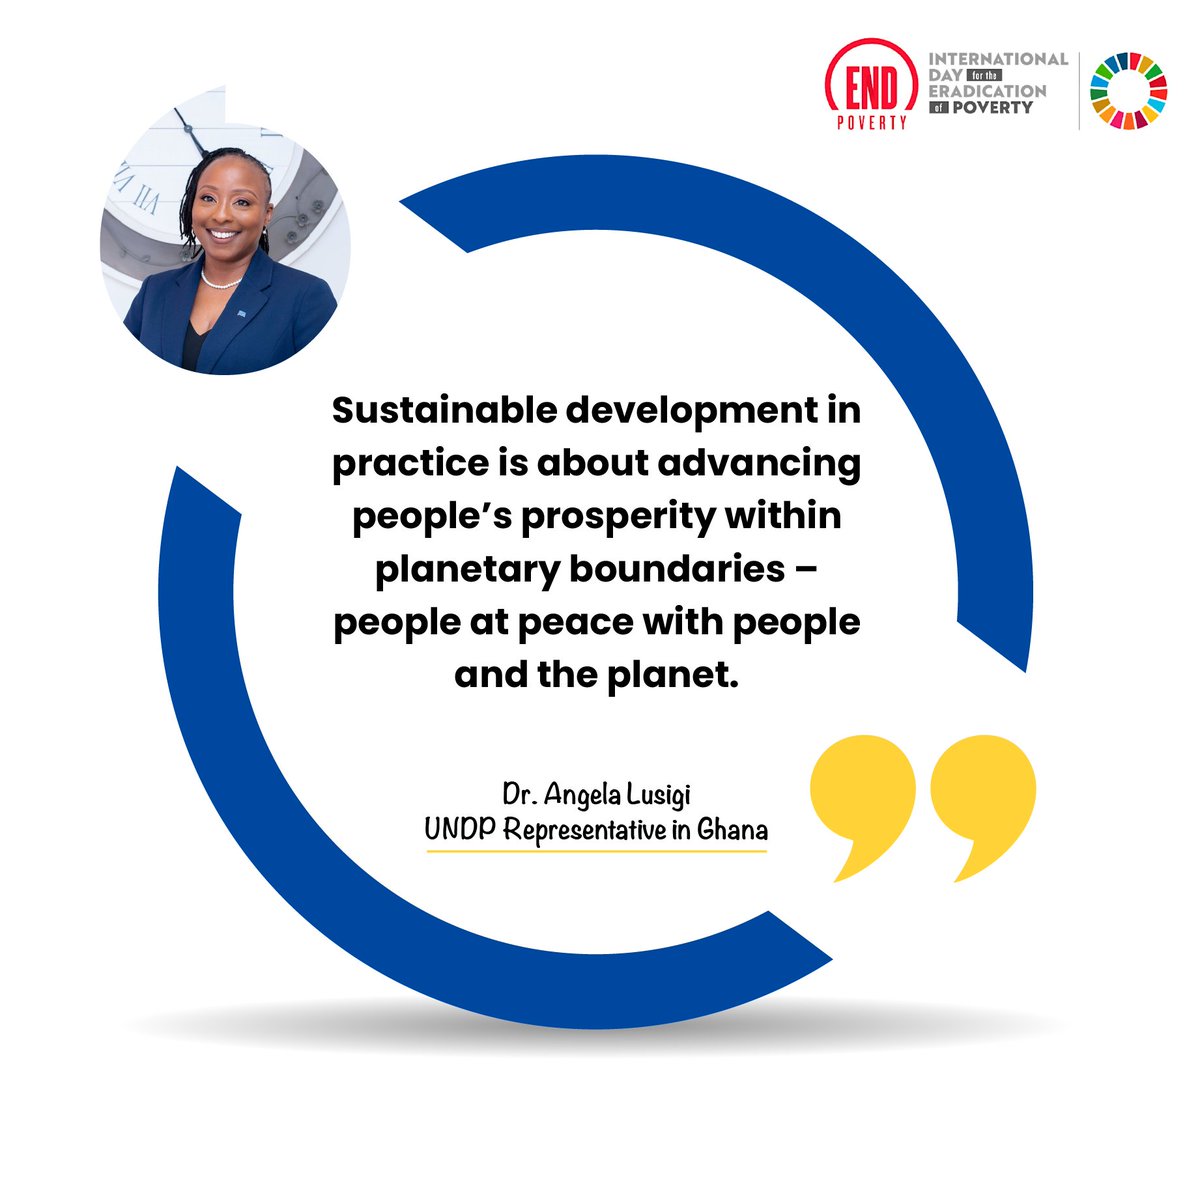 By putting people at the centre of devt, our programmes demonstrate that sustainable devt is about dignity for all. Sus.devt in practice is about advancing people’s prosperity – people at peace with people & the planet. #EndPovertyDay piece @angelalusigi: bit.ly/3s7BtfL